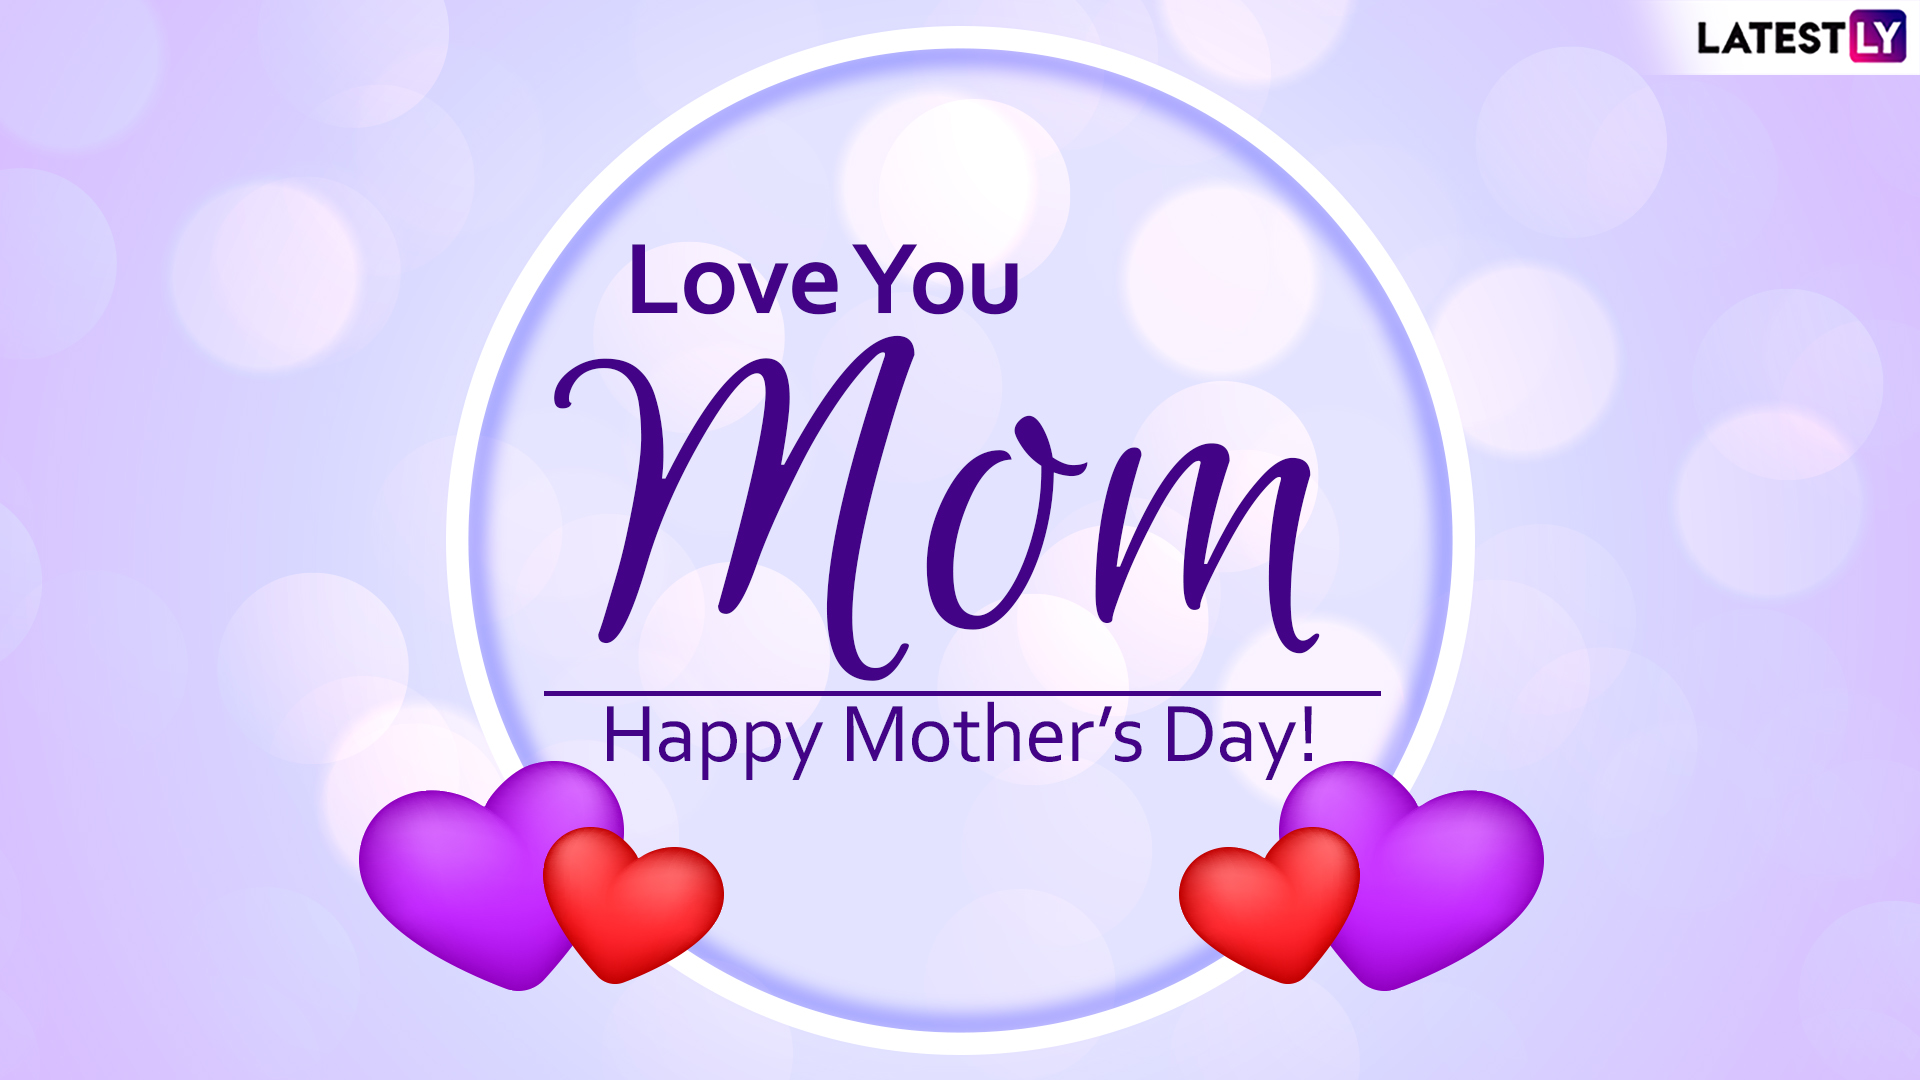 Happy Mother's Day HD Images, Quotes and Wallpapers for Free Download  Online: Send Mother's Day 2019 Wishes With GIF Greetings & WhatsApp Sticker  Messages | 🙏🏻 LatestLY